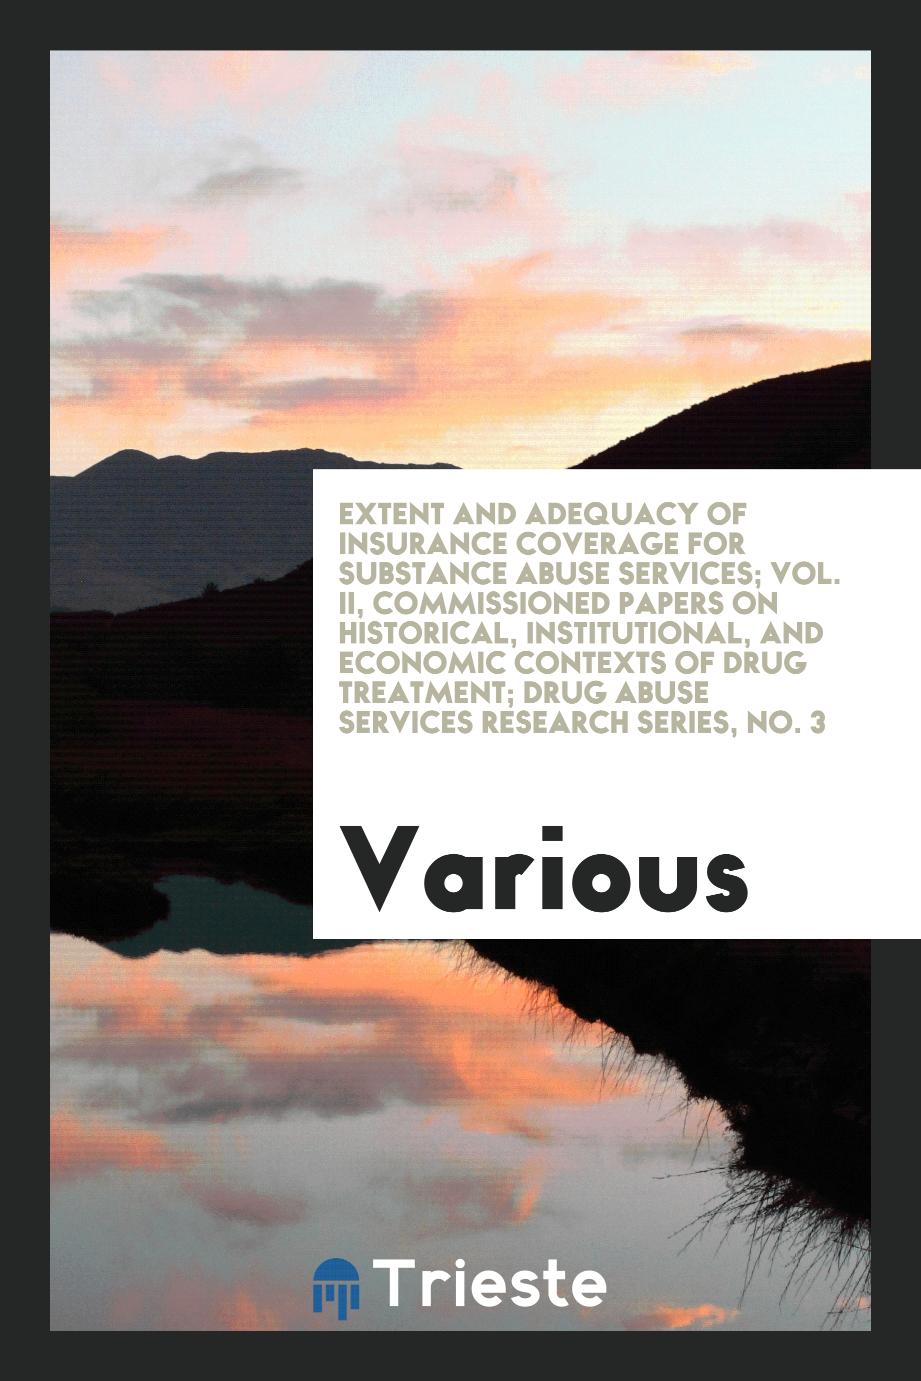 Extent and adequacy of insurance coverage for substance abuse services; Vol. II, Commissioned Papers on Historical, Institutional, and Economic Contexts of Drug Treatment; Drug Abuse Services Research Series, No. 3